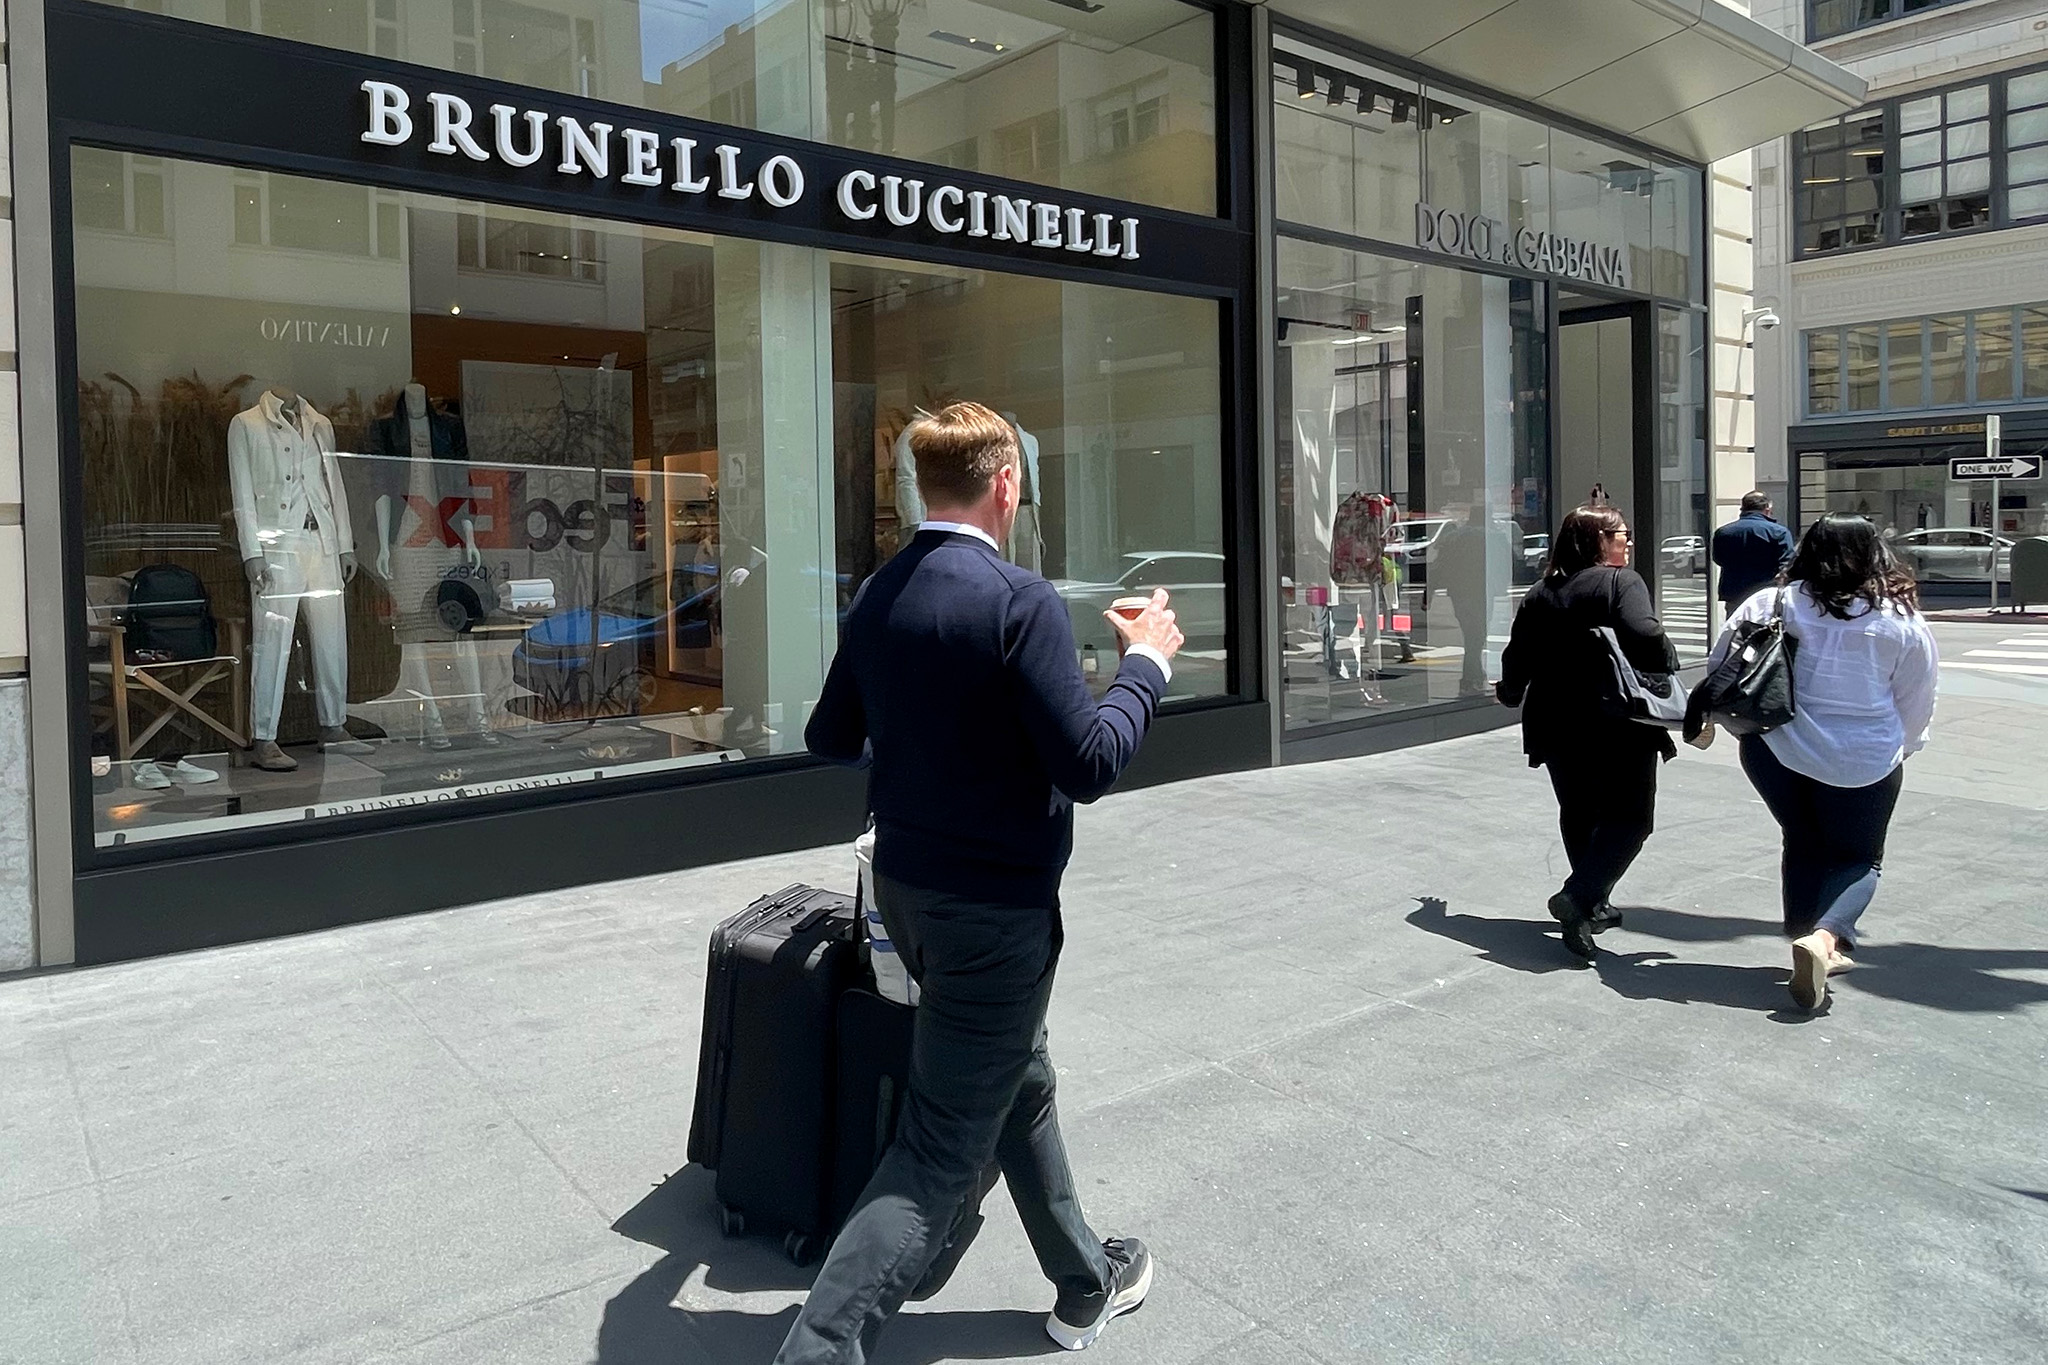 How Brunello Cucinelli's SF Union Square location is thriving